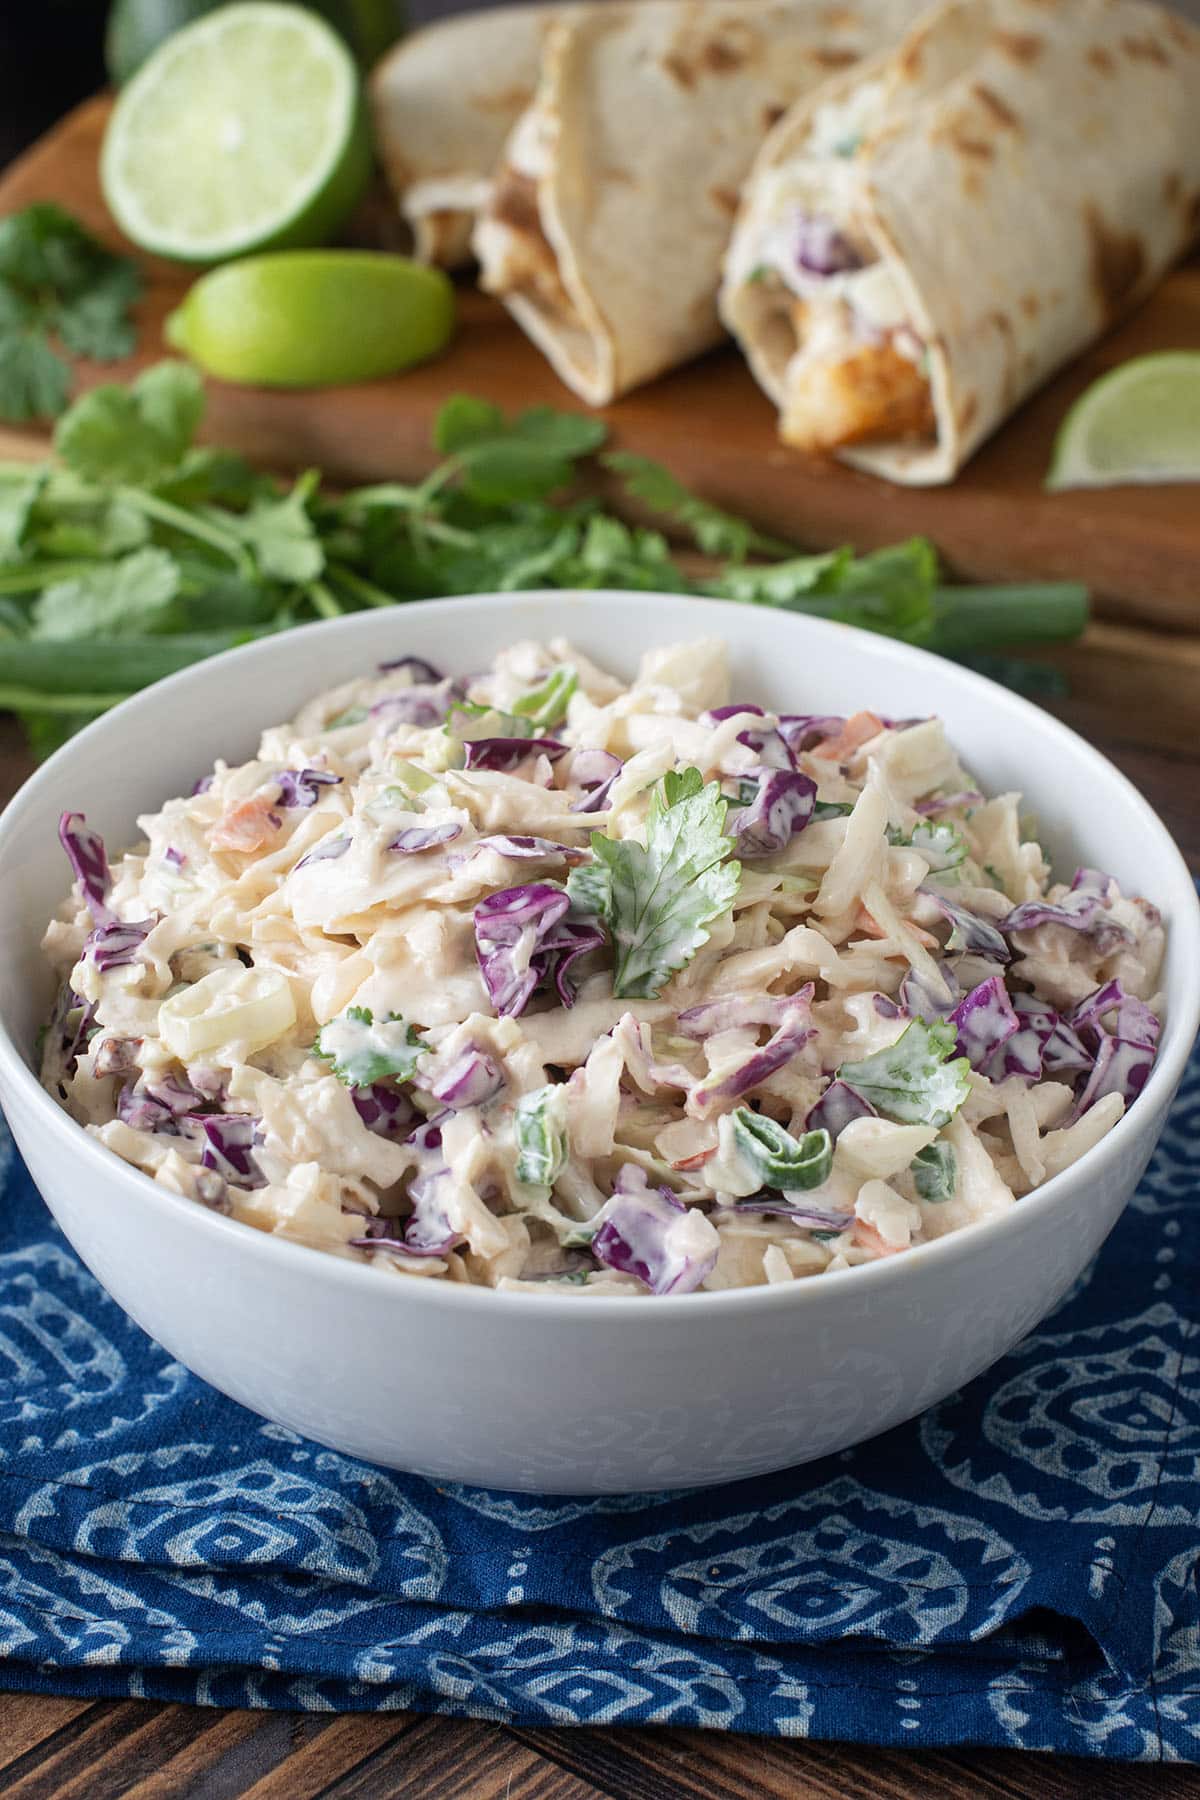 The Perfect Coleslaw for Fish Tacos